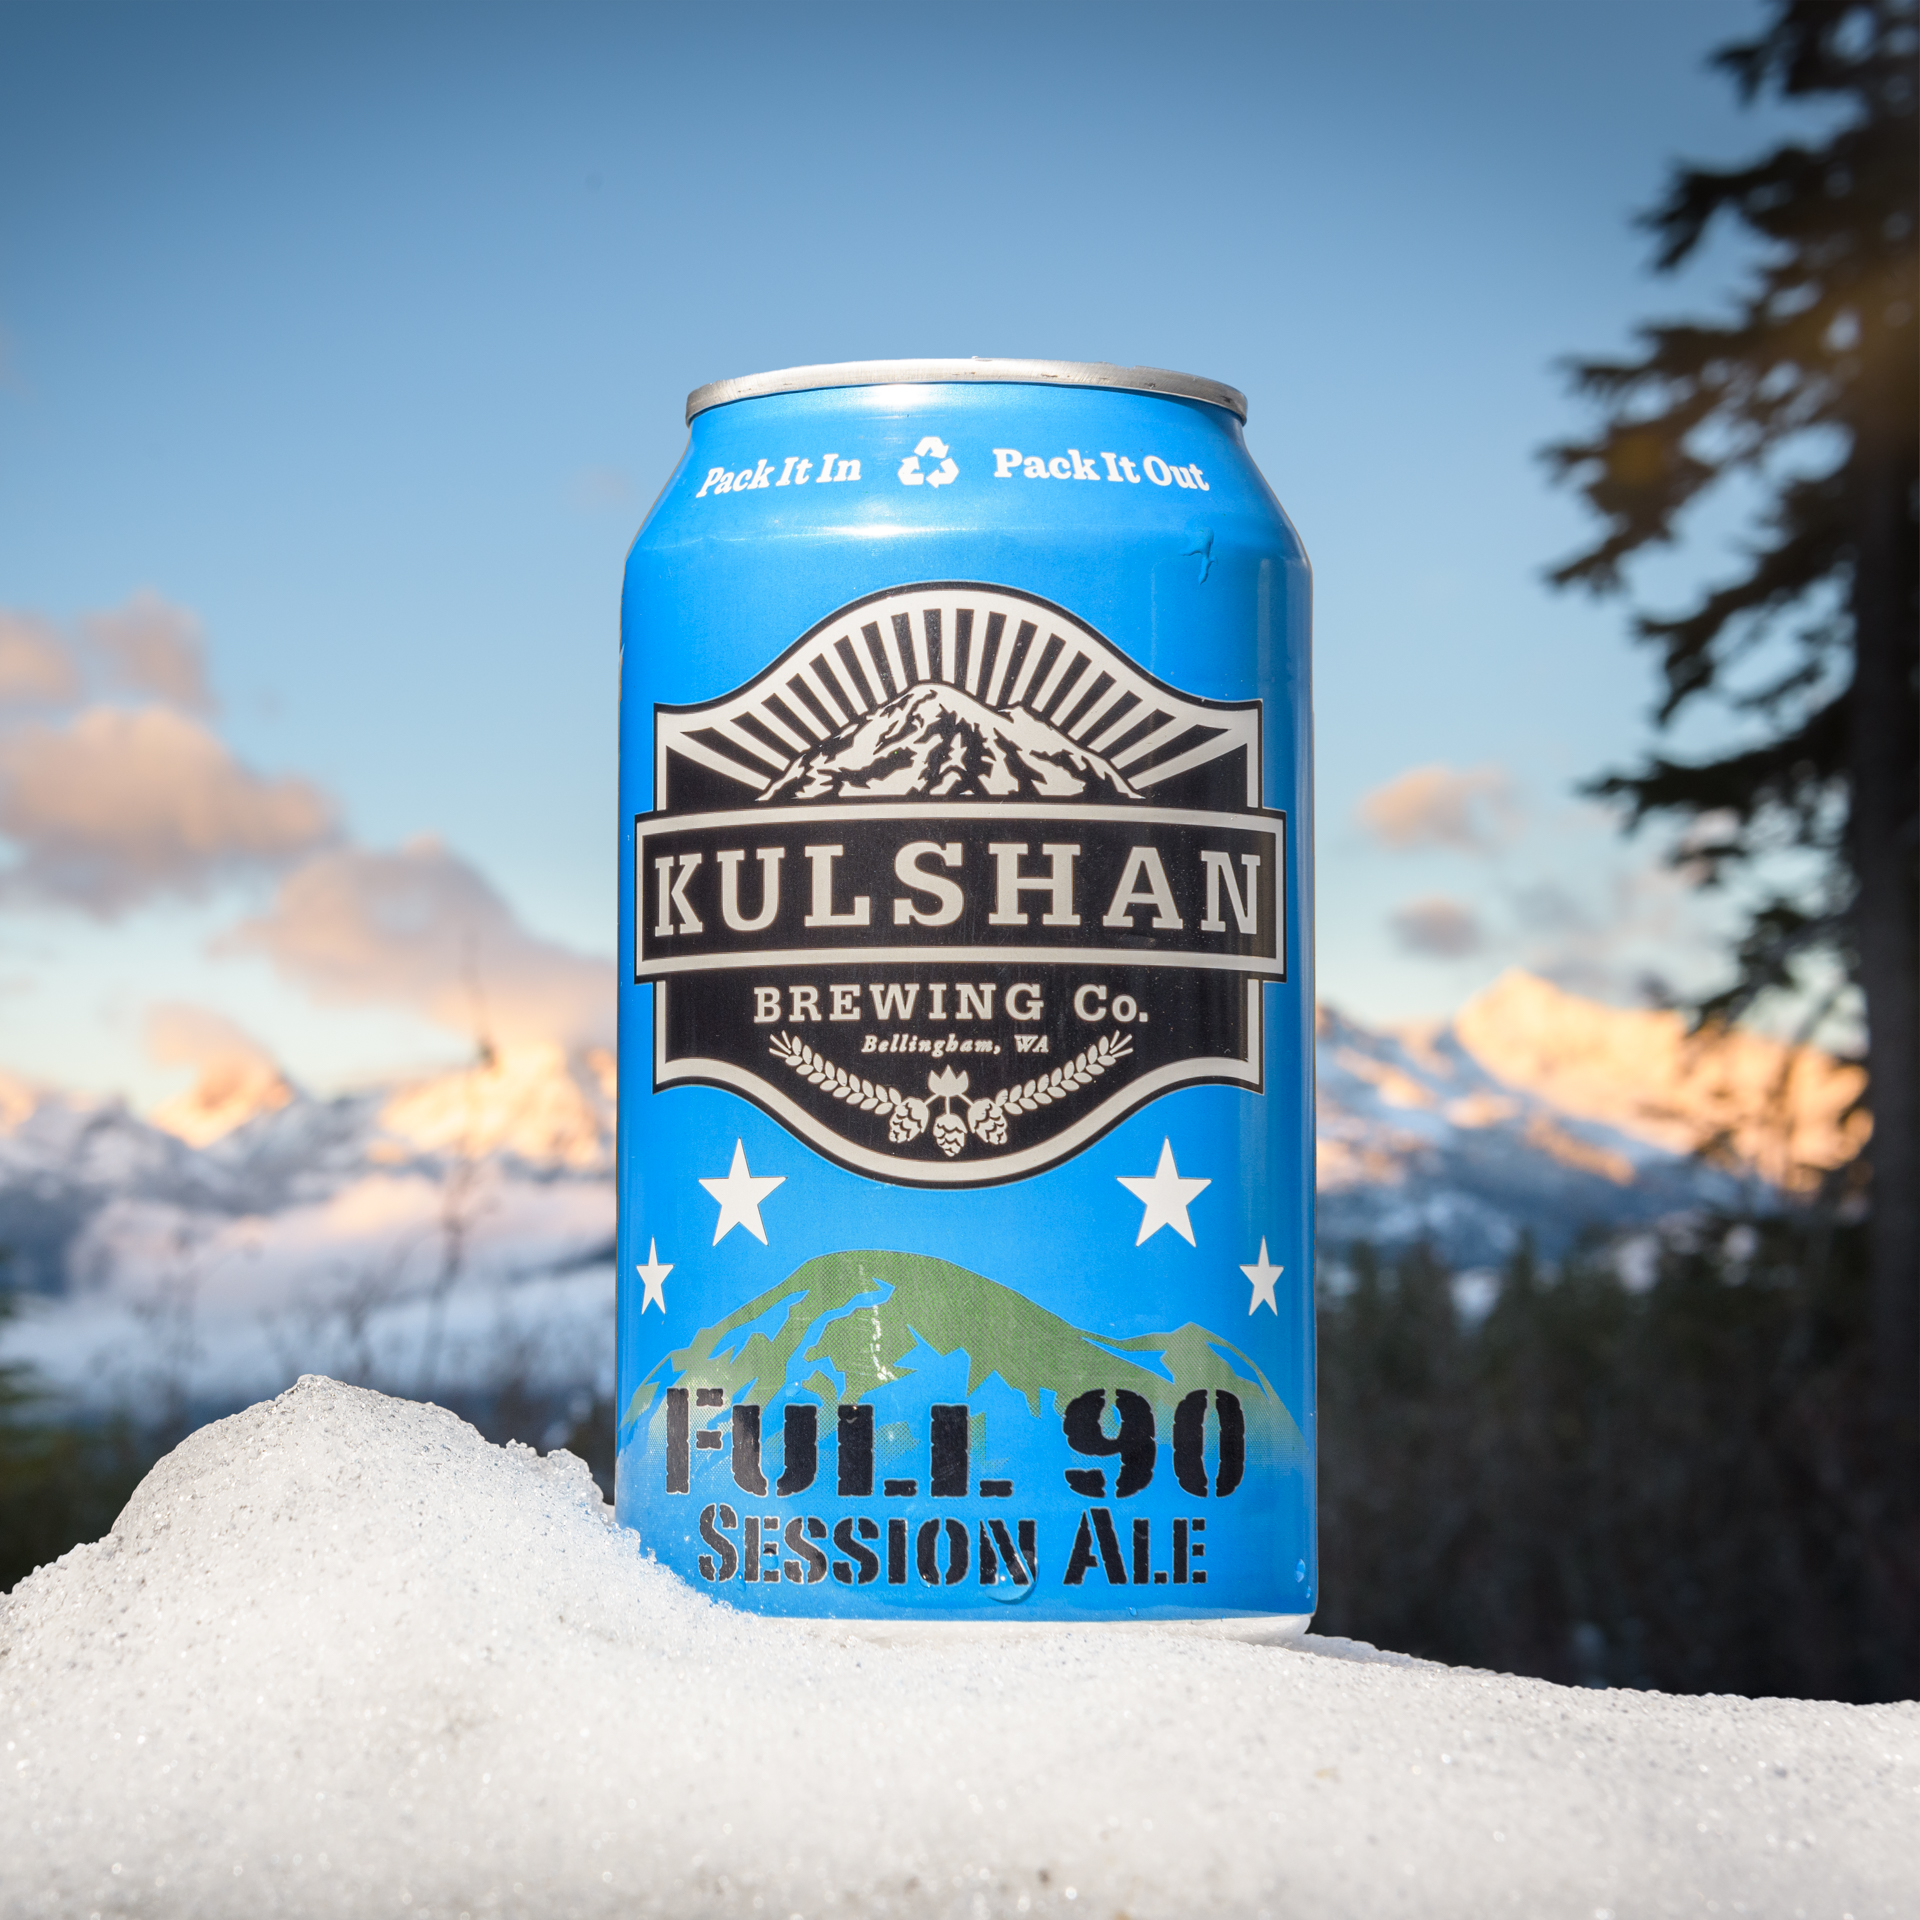 Kulshan beer can in the snow in the mountains baker